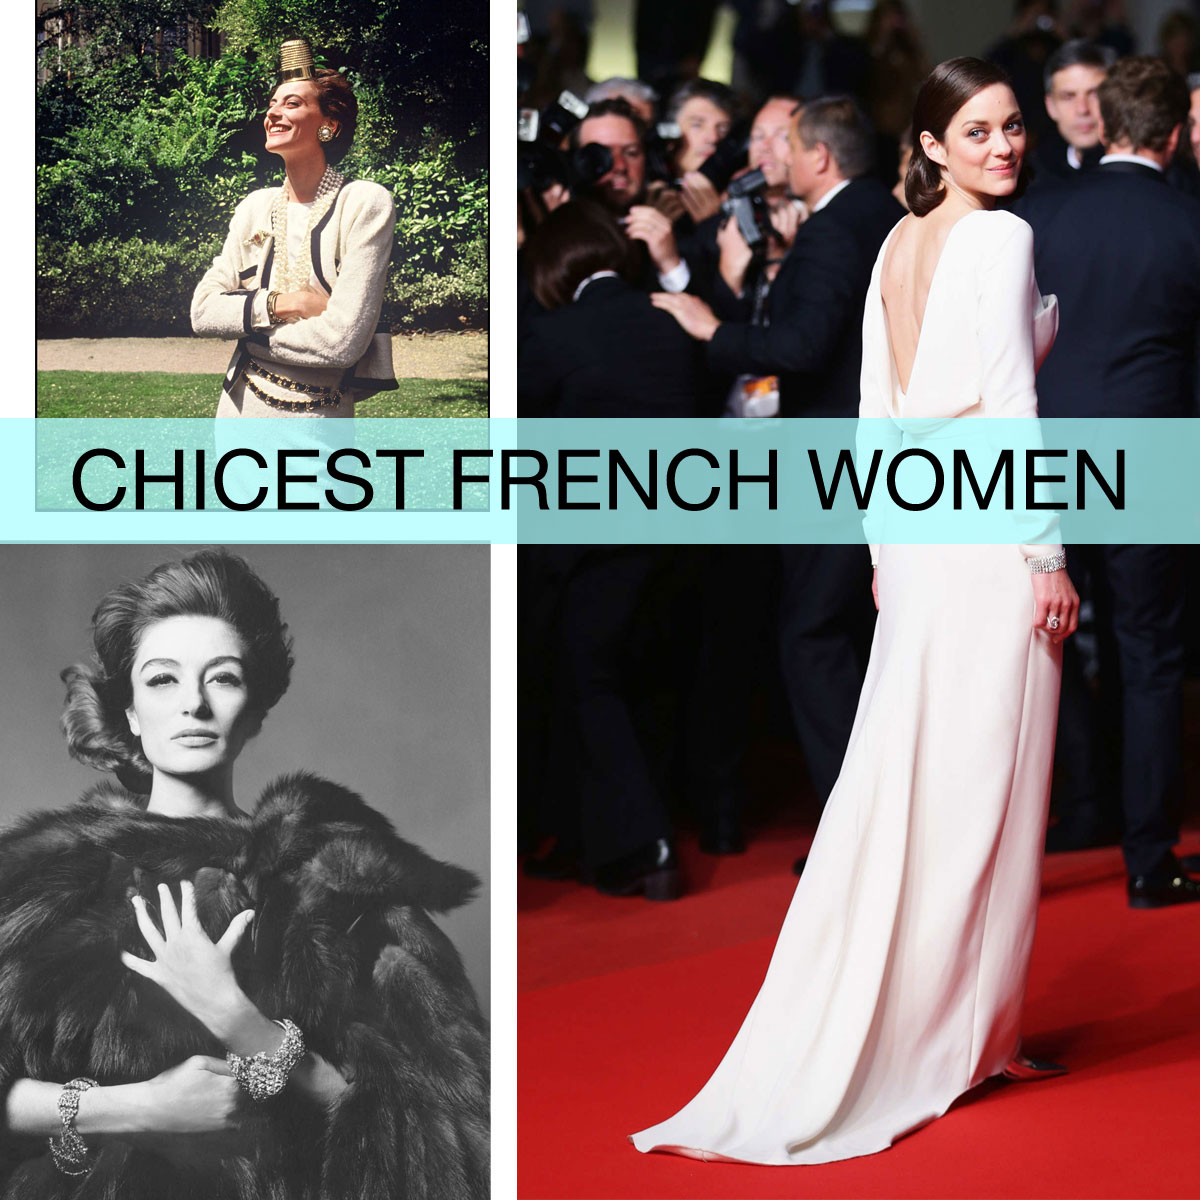   The 50 Chicest French Women Ever  for  New York Magazine 's The Cut  July 2013 